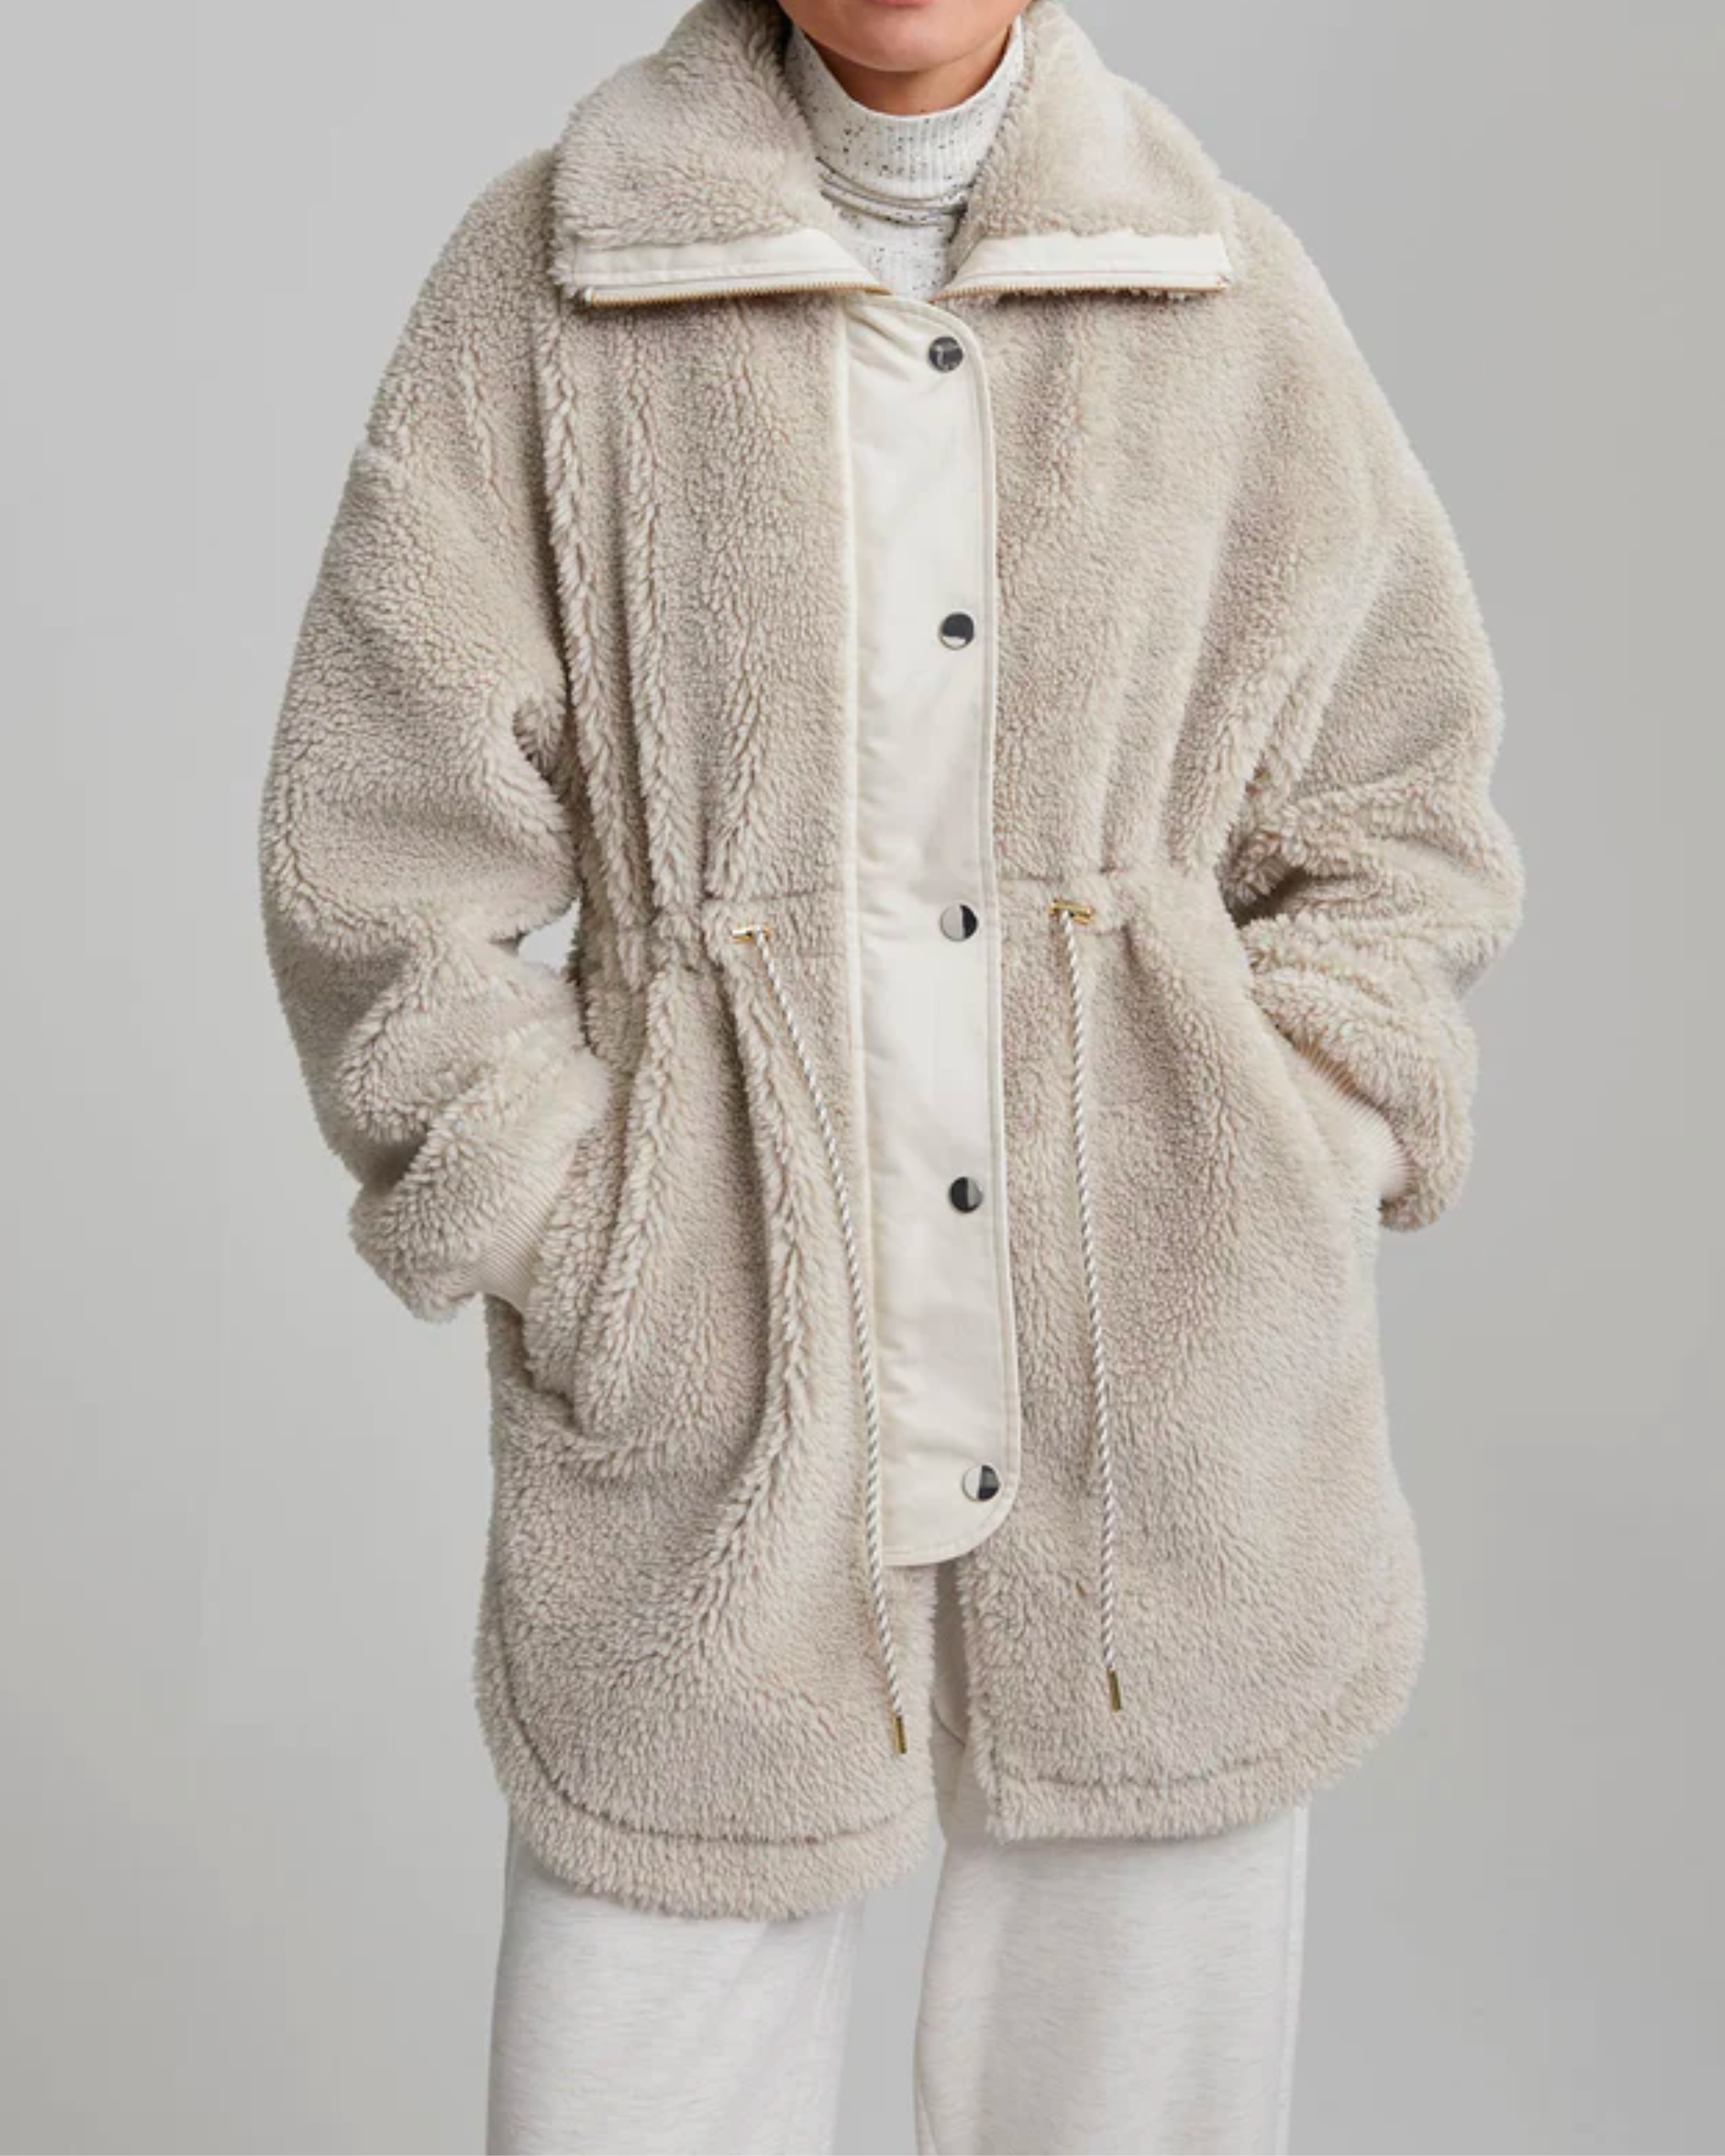 Varley Jamie Sherpa Jacket in Chateau Grey Sand Shell